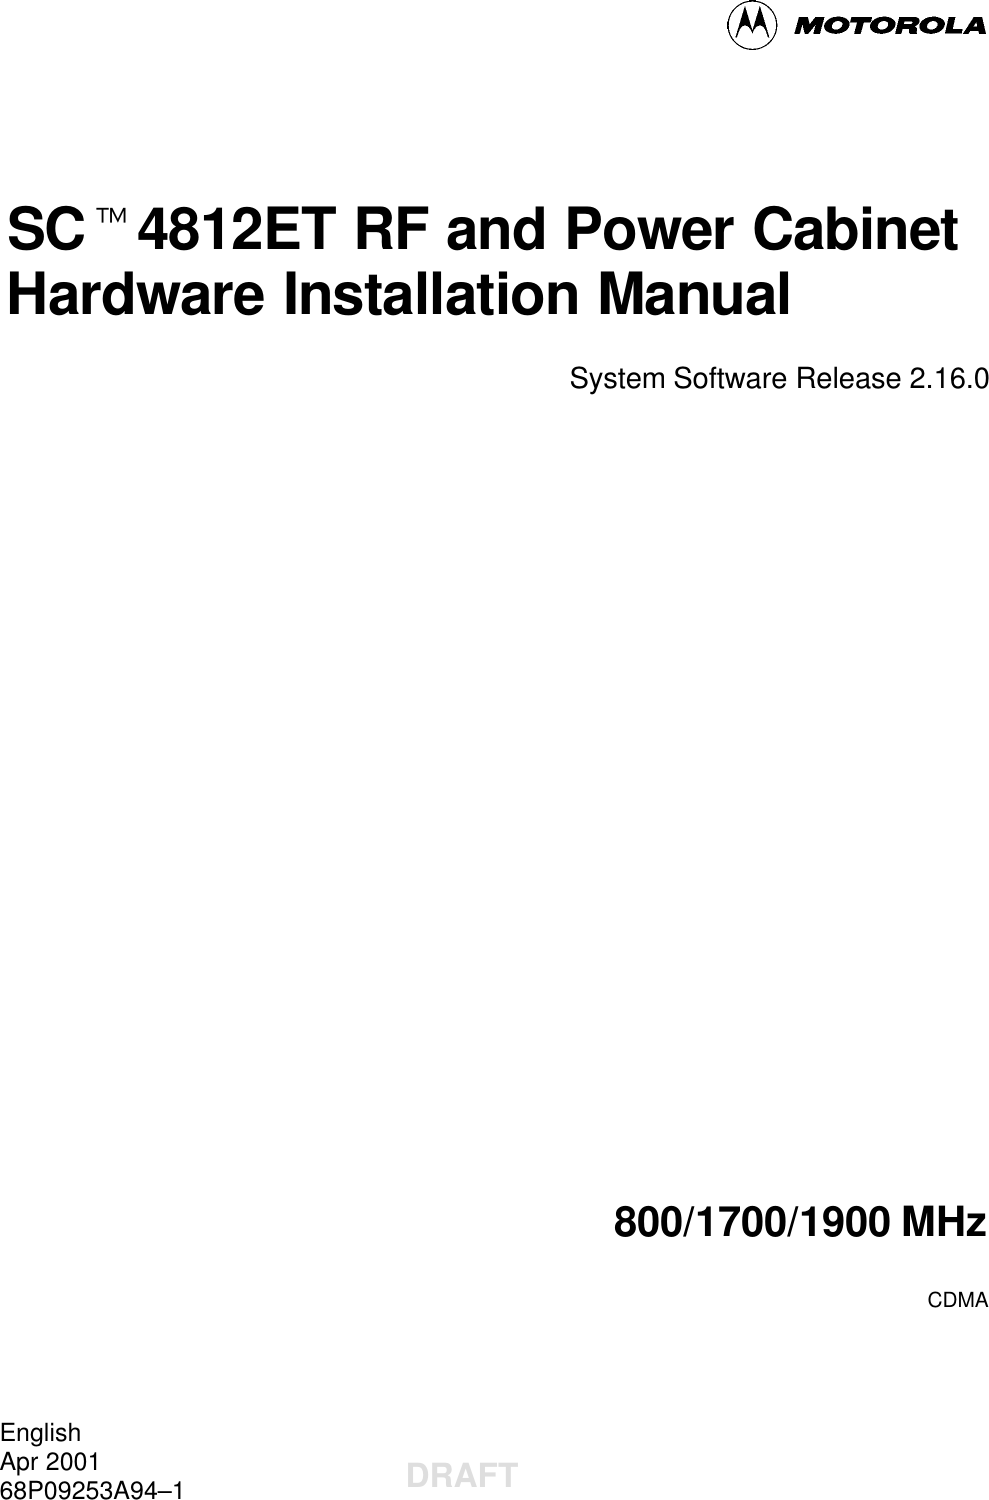 SCt4812ET RF and Power CabinetHardware Installation ManualSystem Software Release 2.16.0800/1700/1900 MHzCDMAEnglishApr 200168P09253A94–1DRAFT